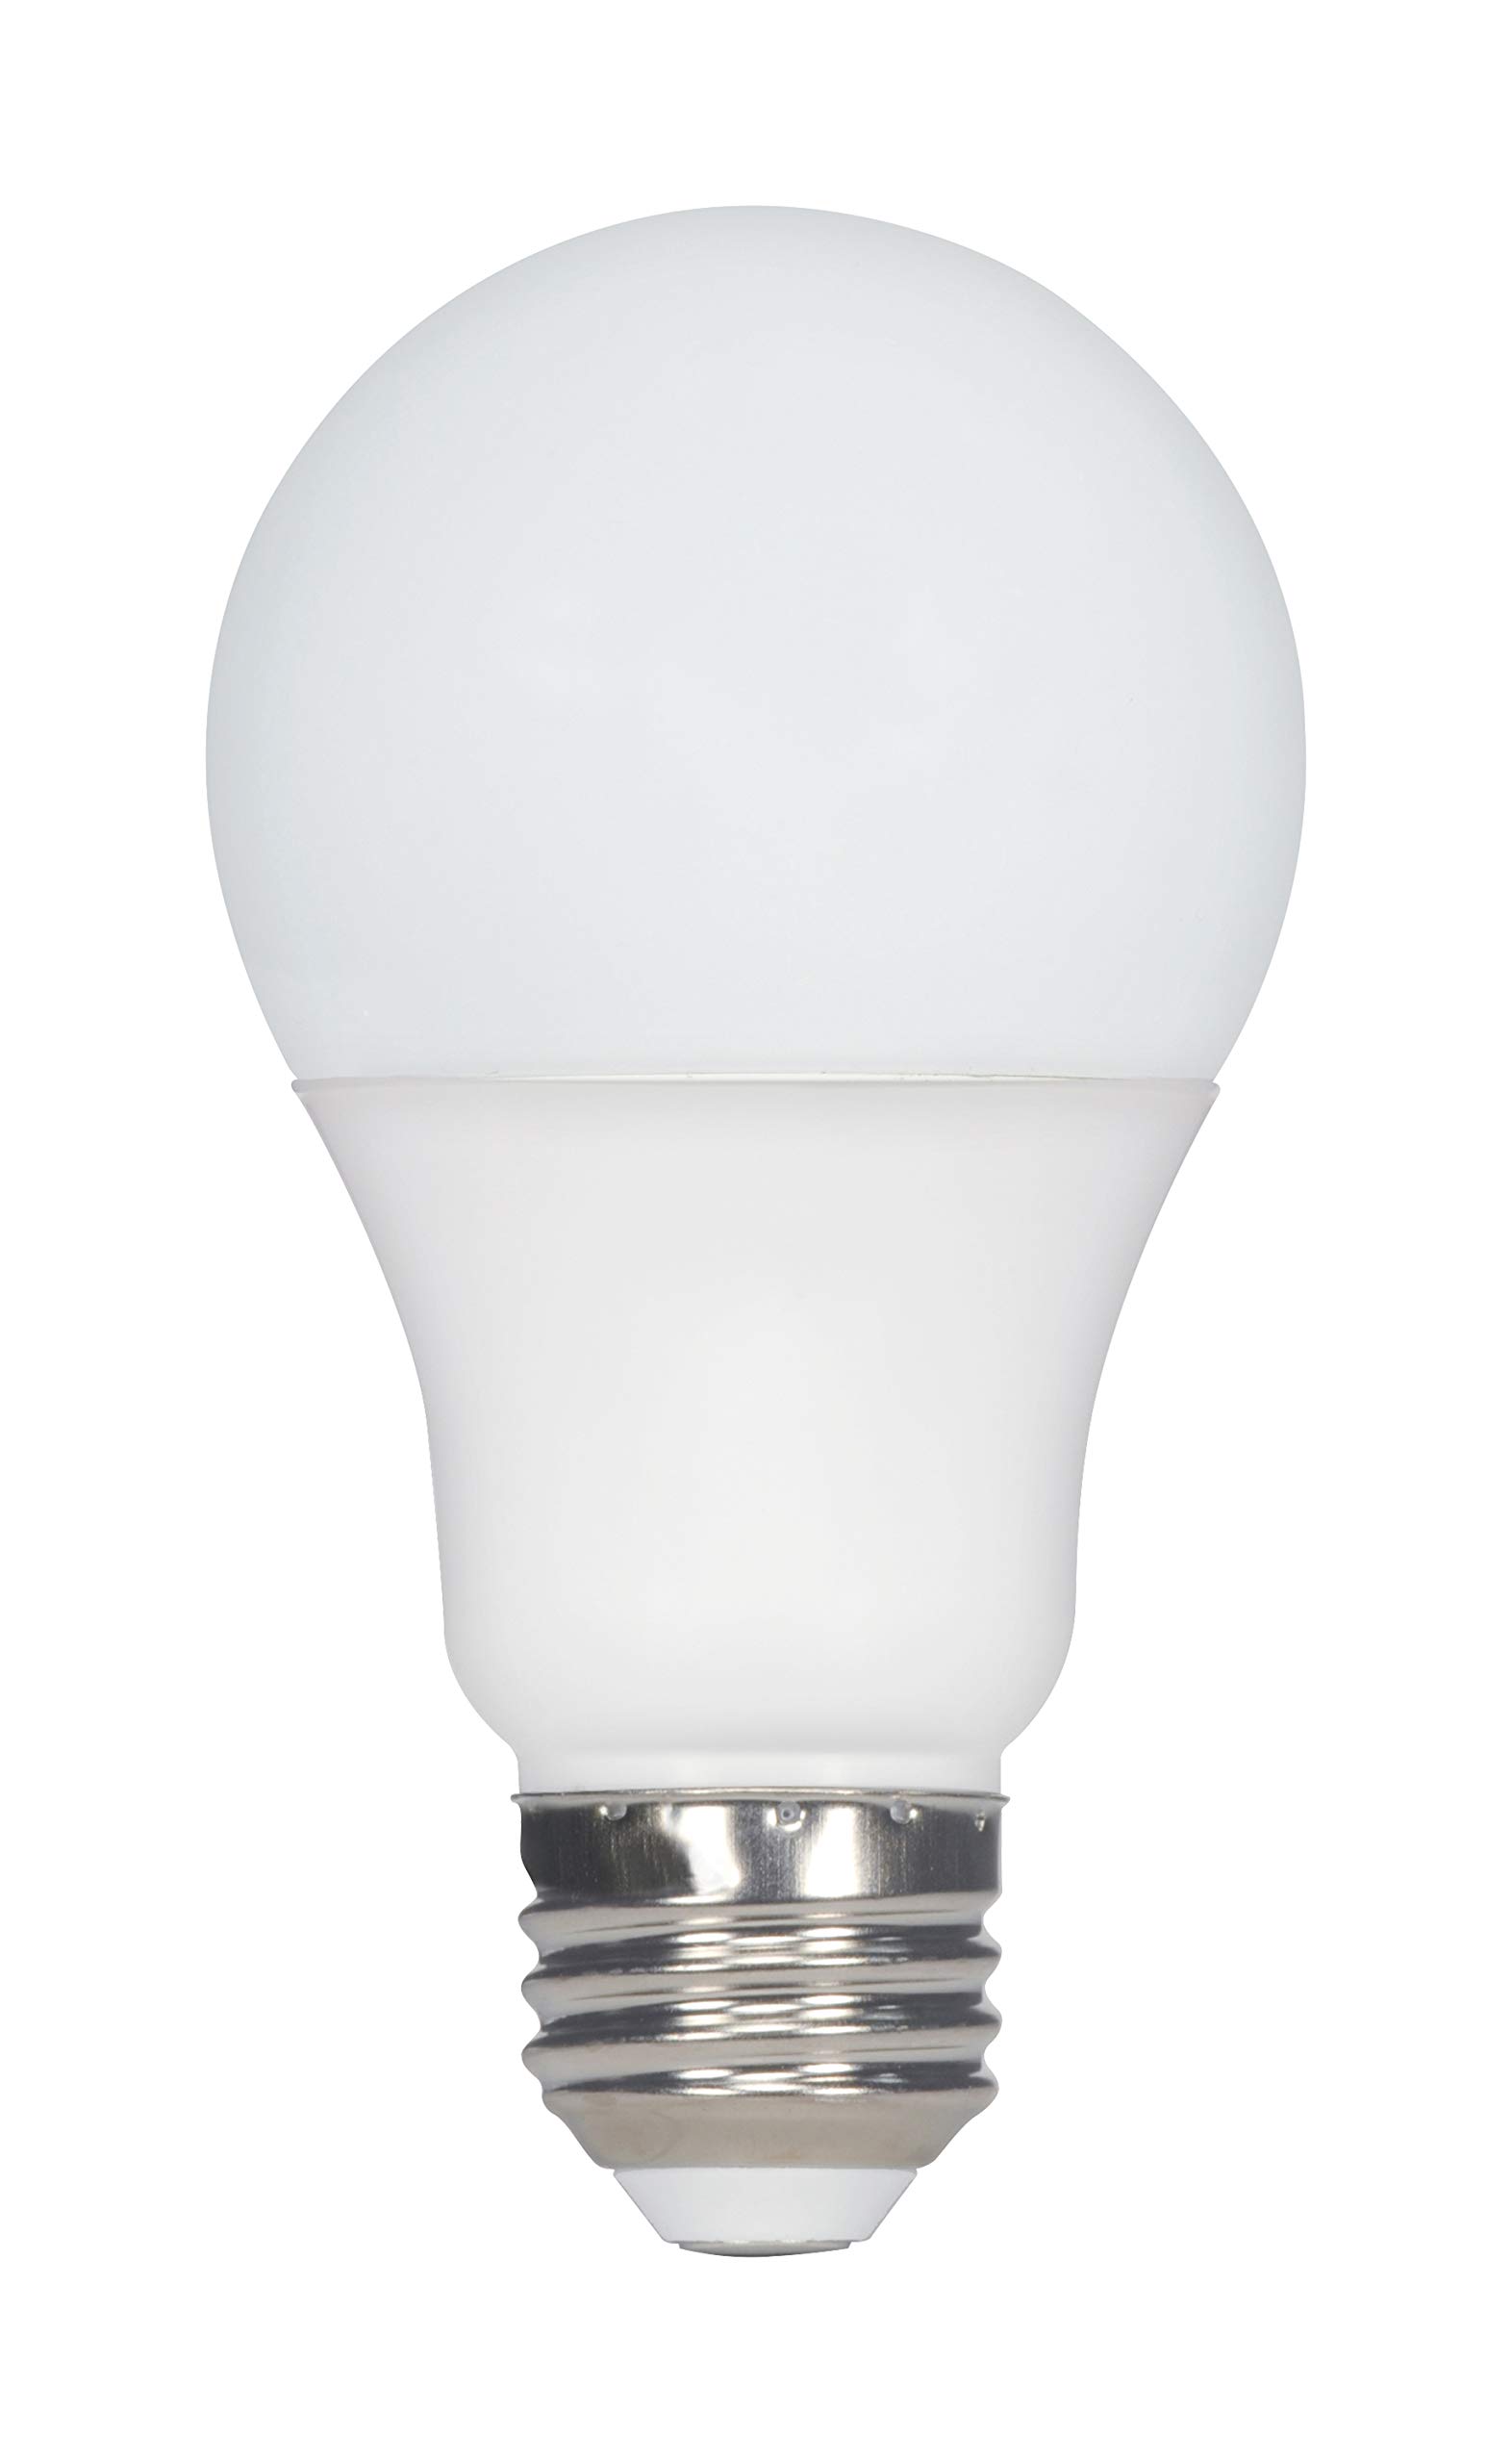 ''Satco 11408 Econo LED A19 LIGHT BULB, 60W Replacement, 4000K Cool White, 800 Lumens''